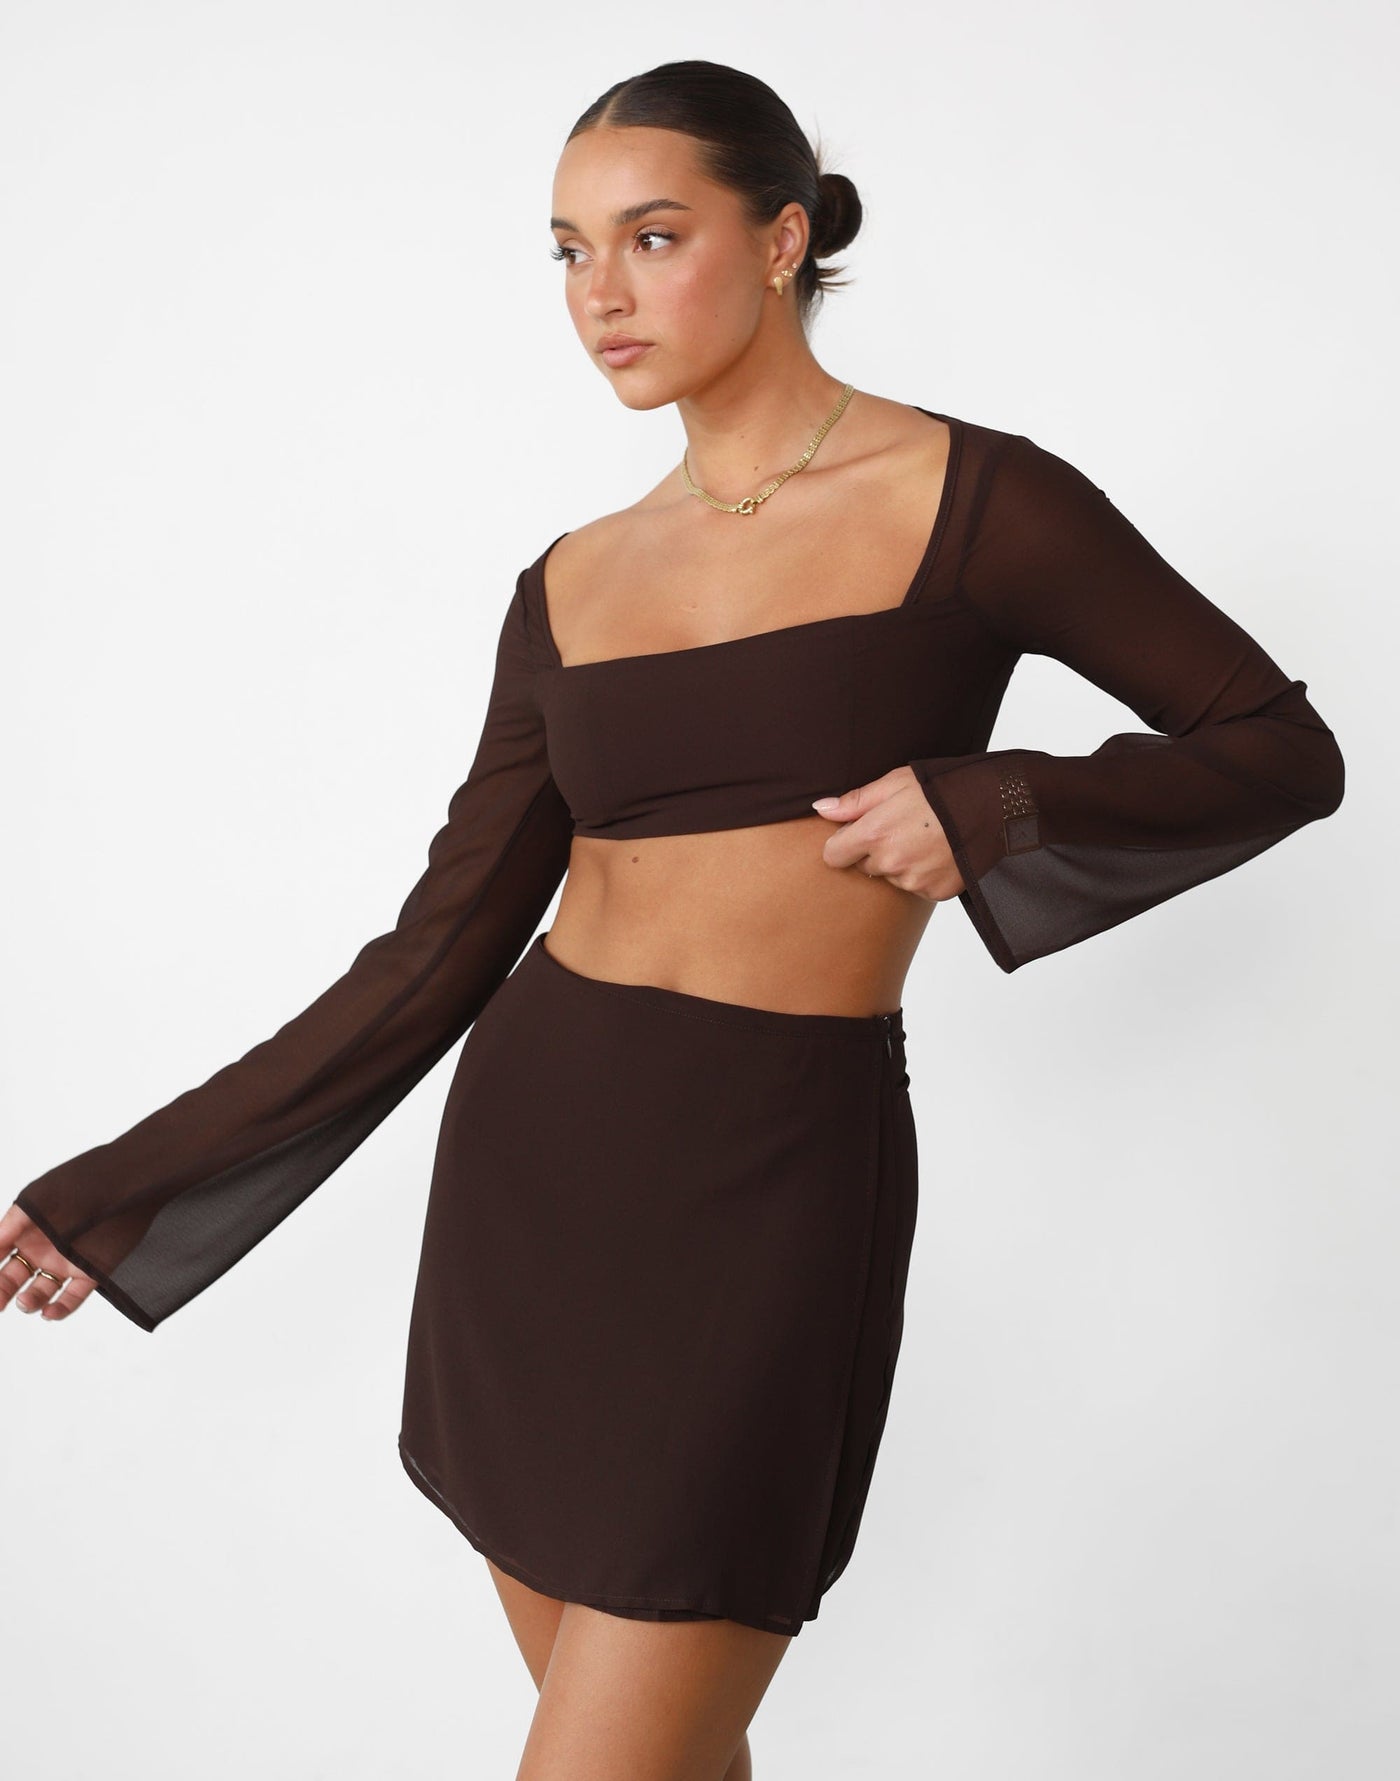 Abby Long Sleeve Top (Cocoa) - Long Sleeve Tie Back Top - Women's Top - Charcoal Clothing